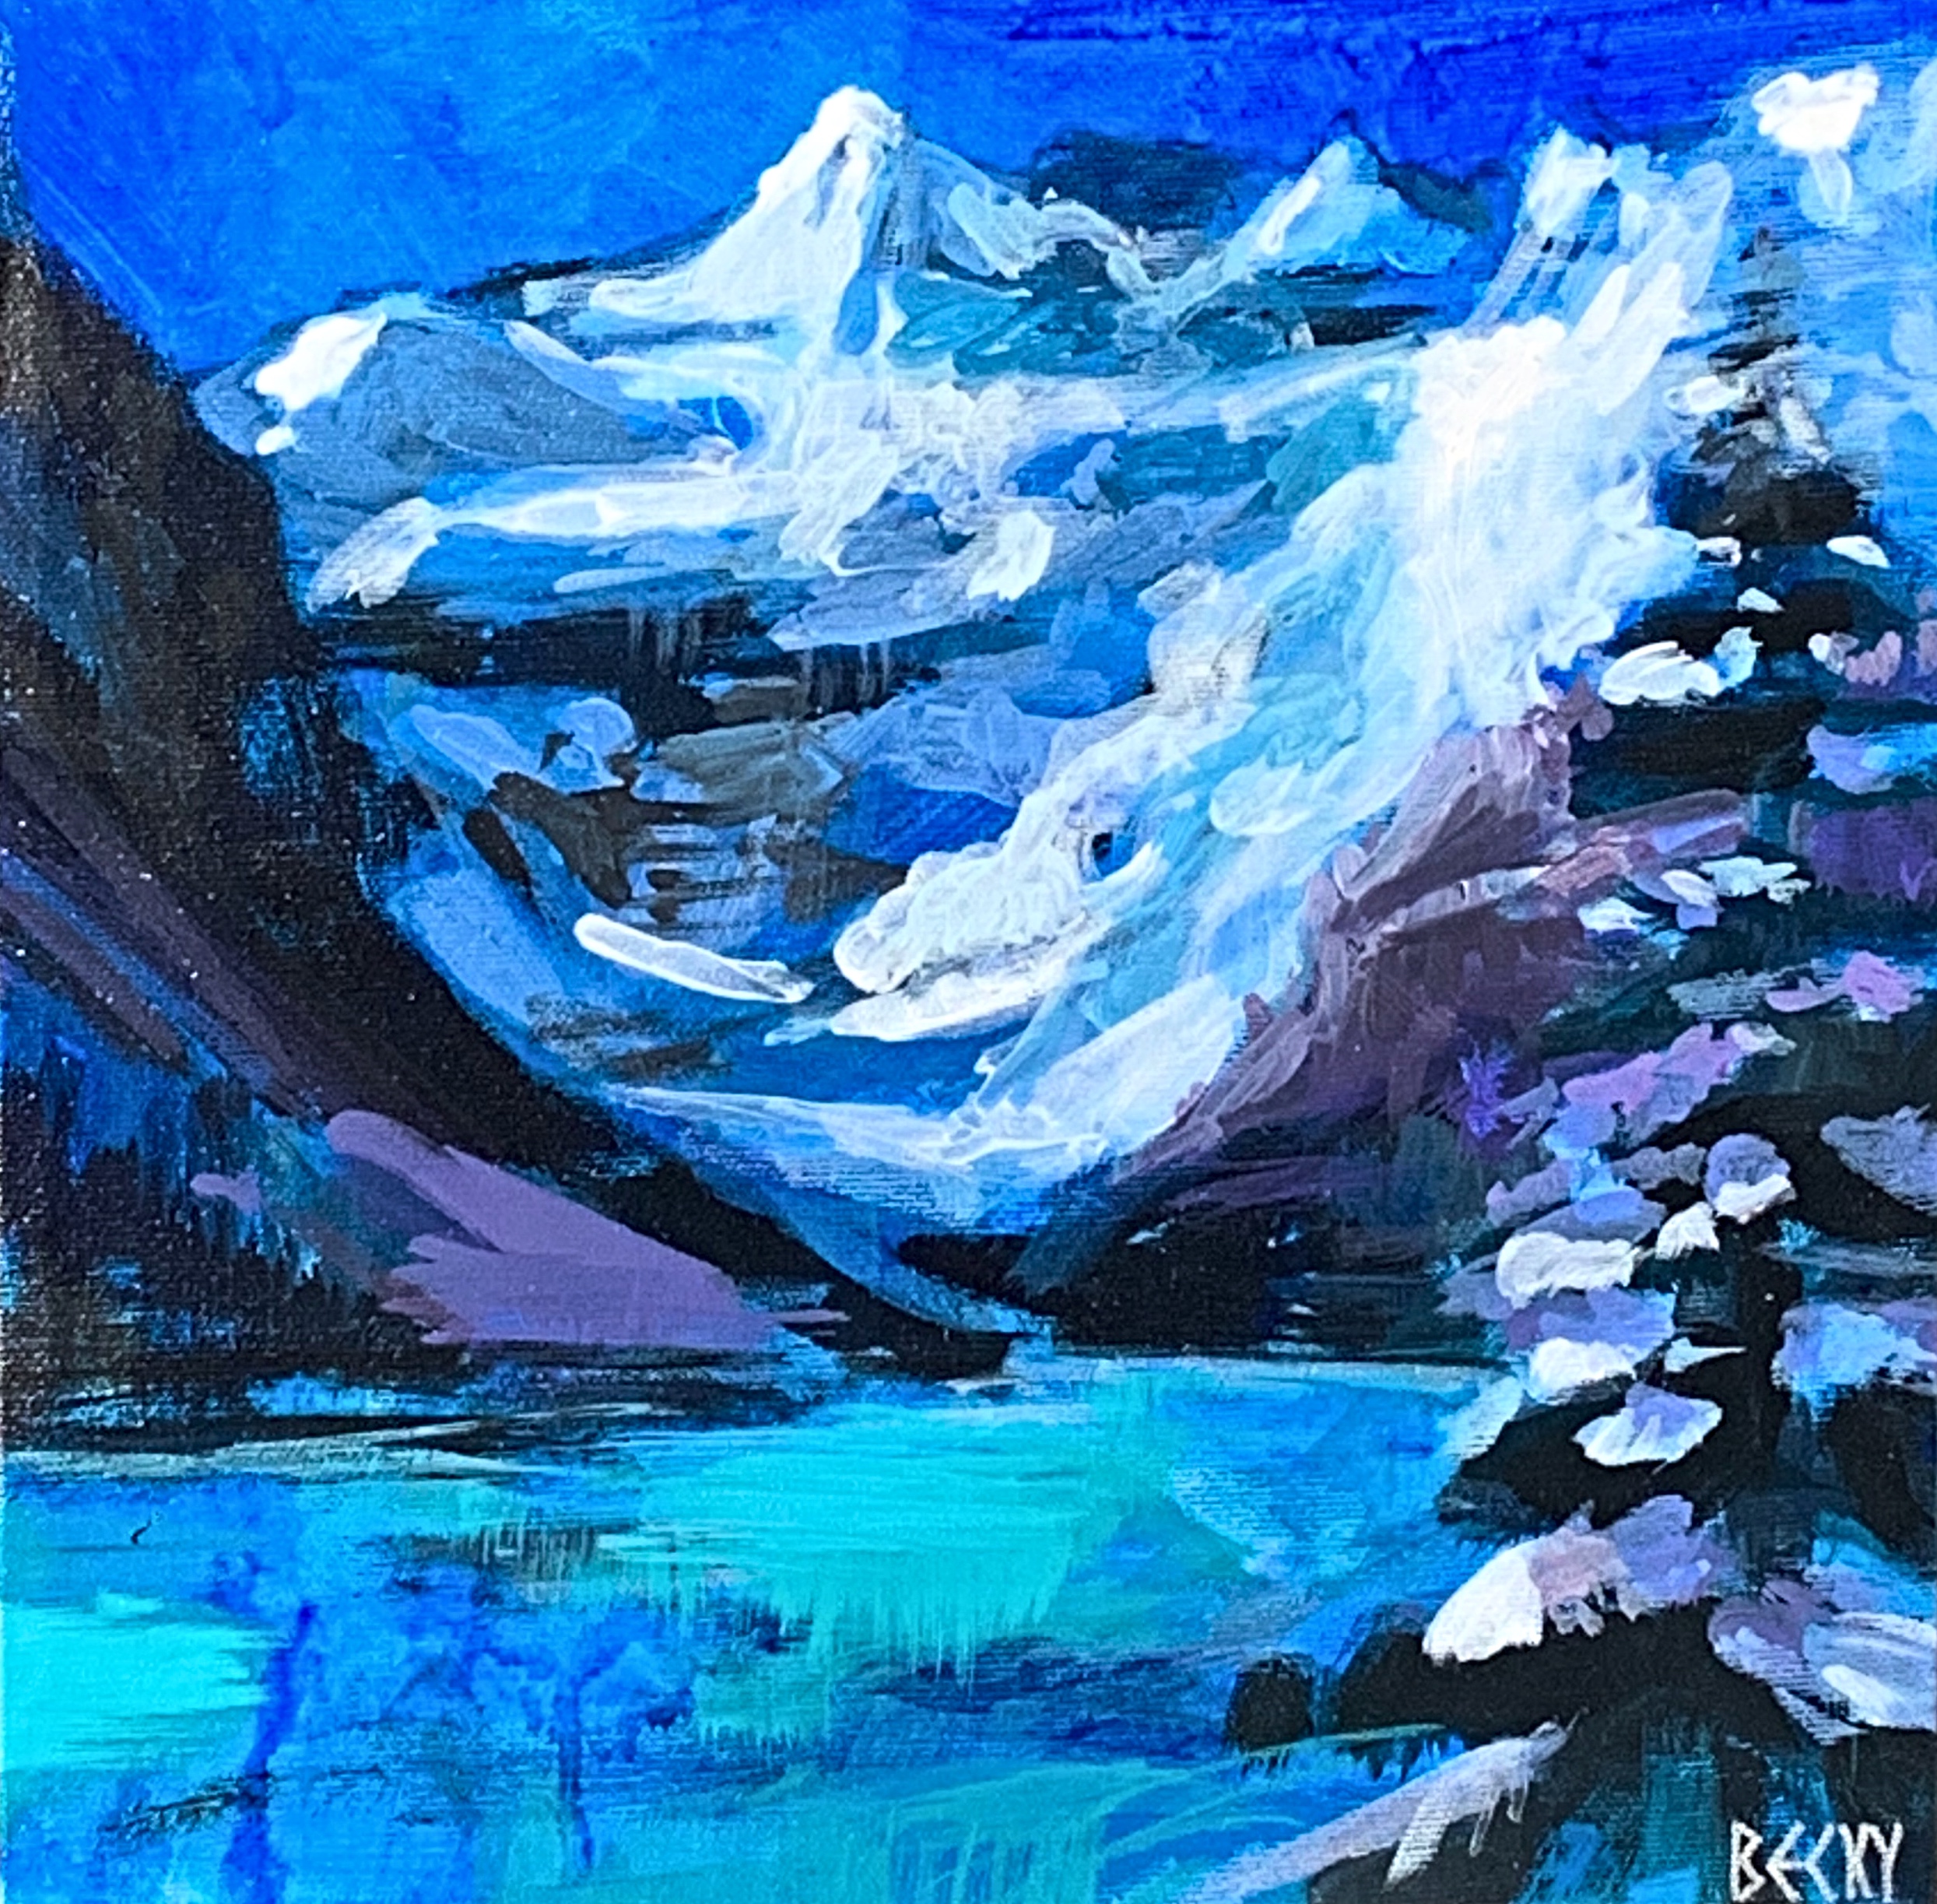 Holy Night, acrylic landscape by Becky Holuk | Effusion Art Gallery + Cast Glass Studio, Invermere BC